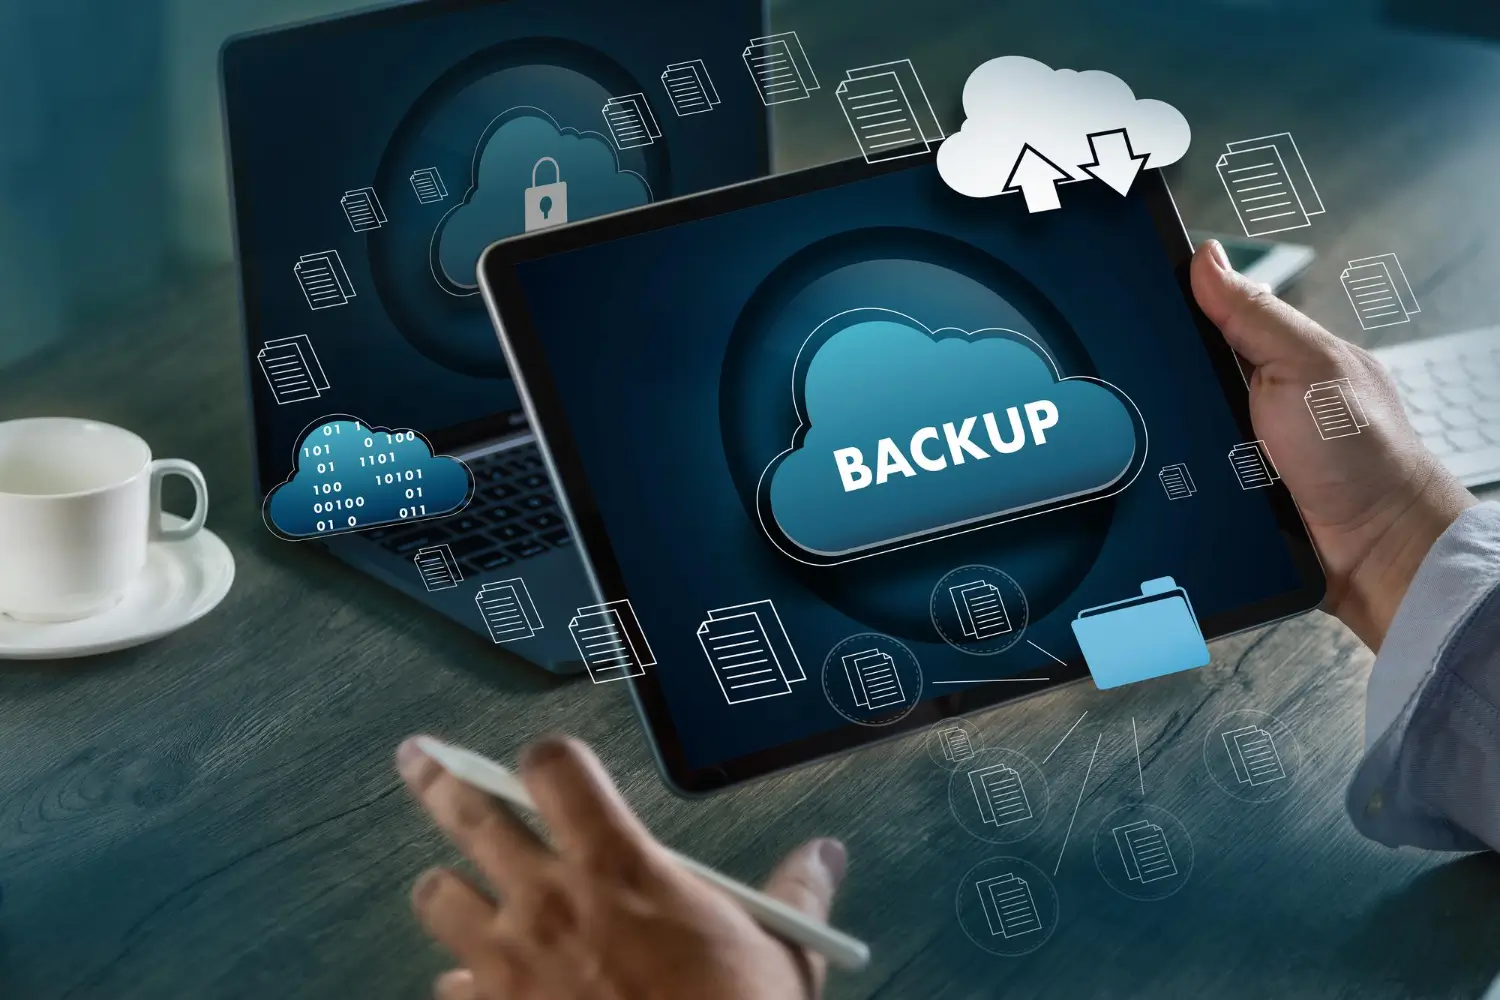 How to Backup a WordPress Site